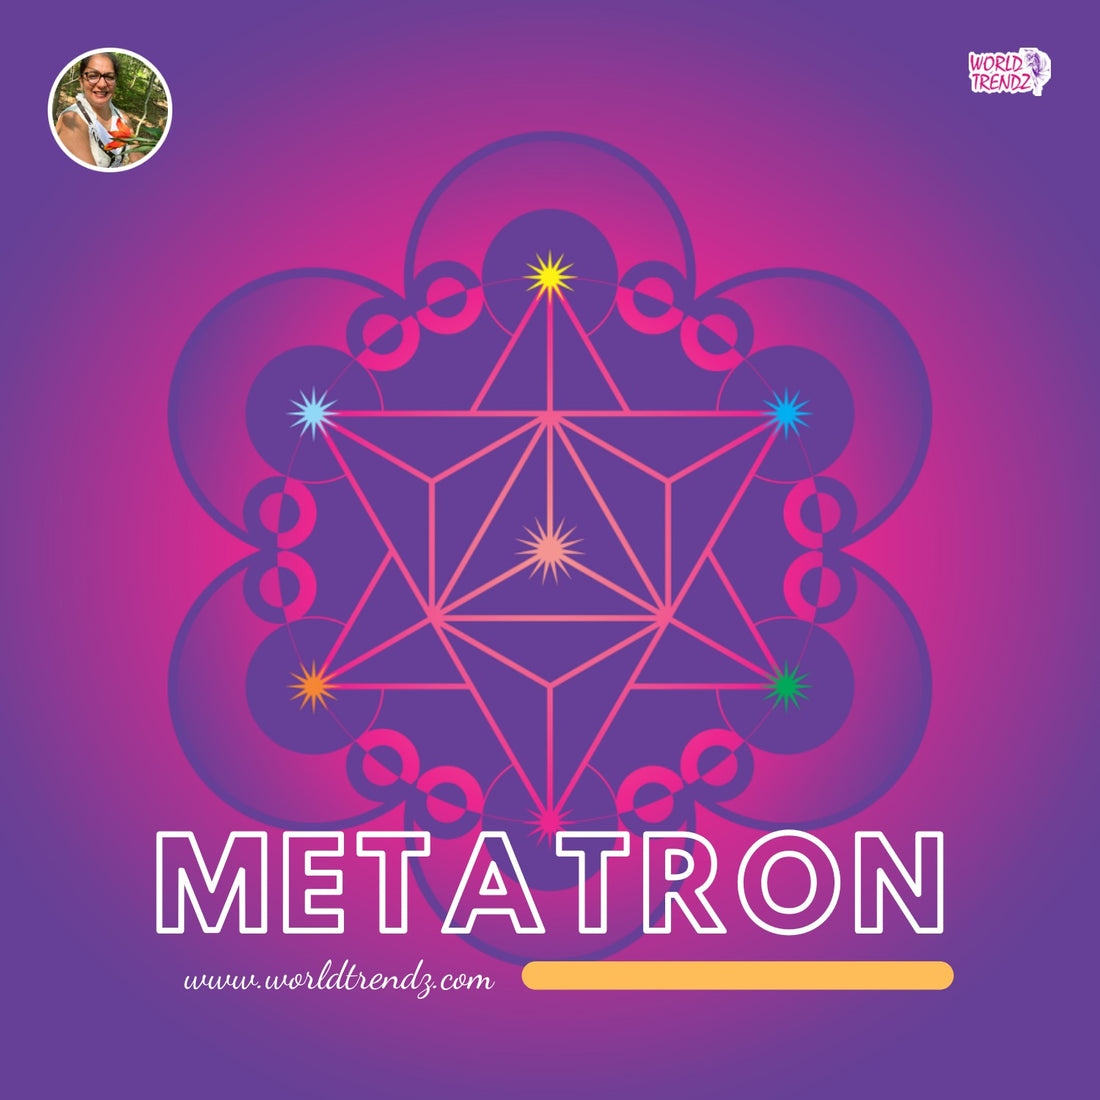 Real-Life Lessons About Metatron